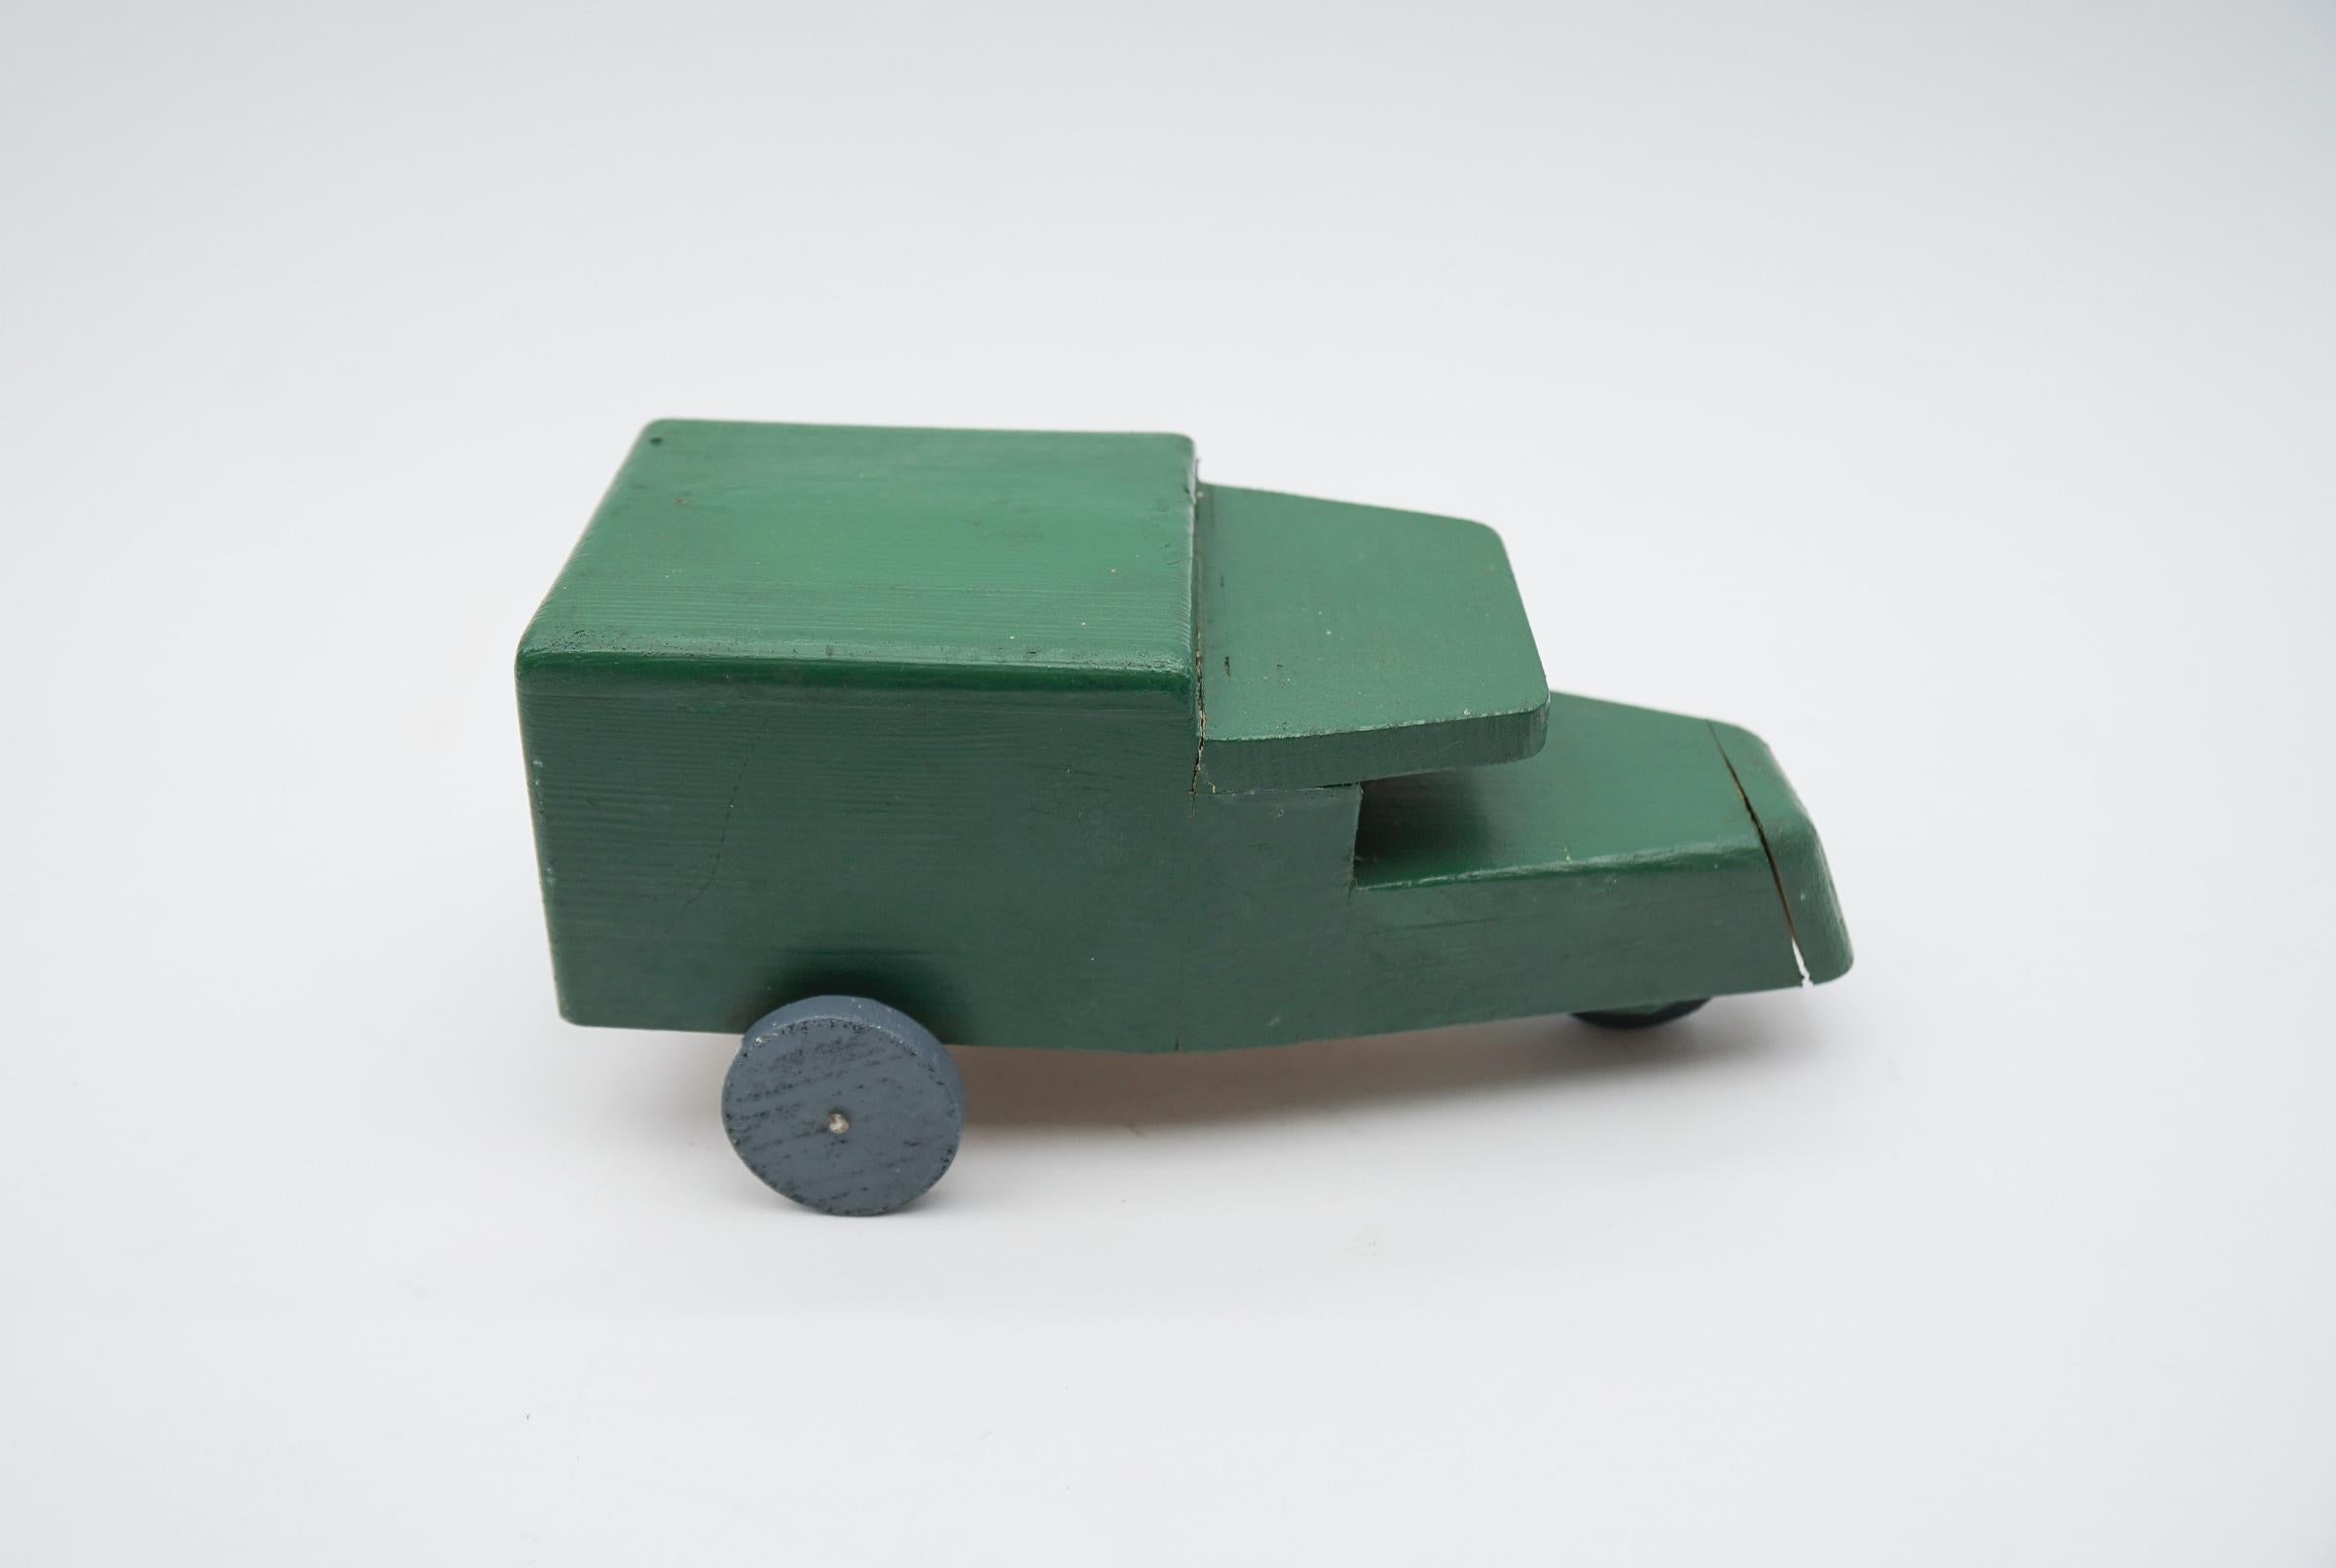 Mid-20th Century Typical Handmade Military Vehicle from the 2nd World War, 1940s / 1950s. For Sale